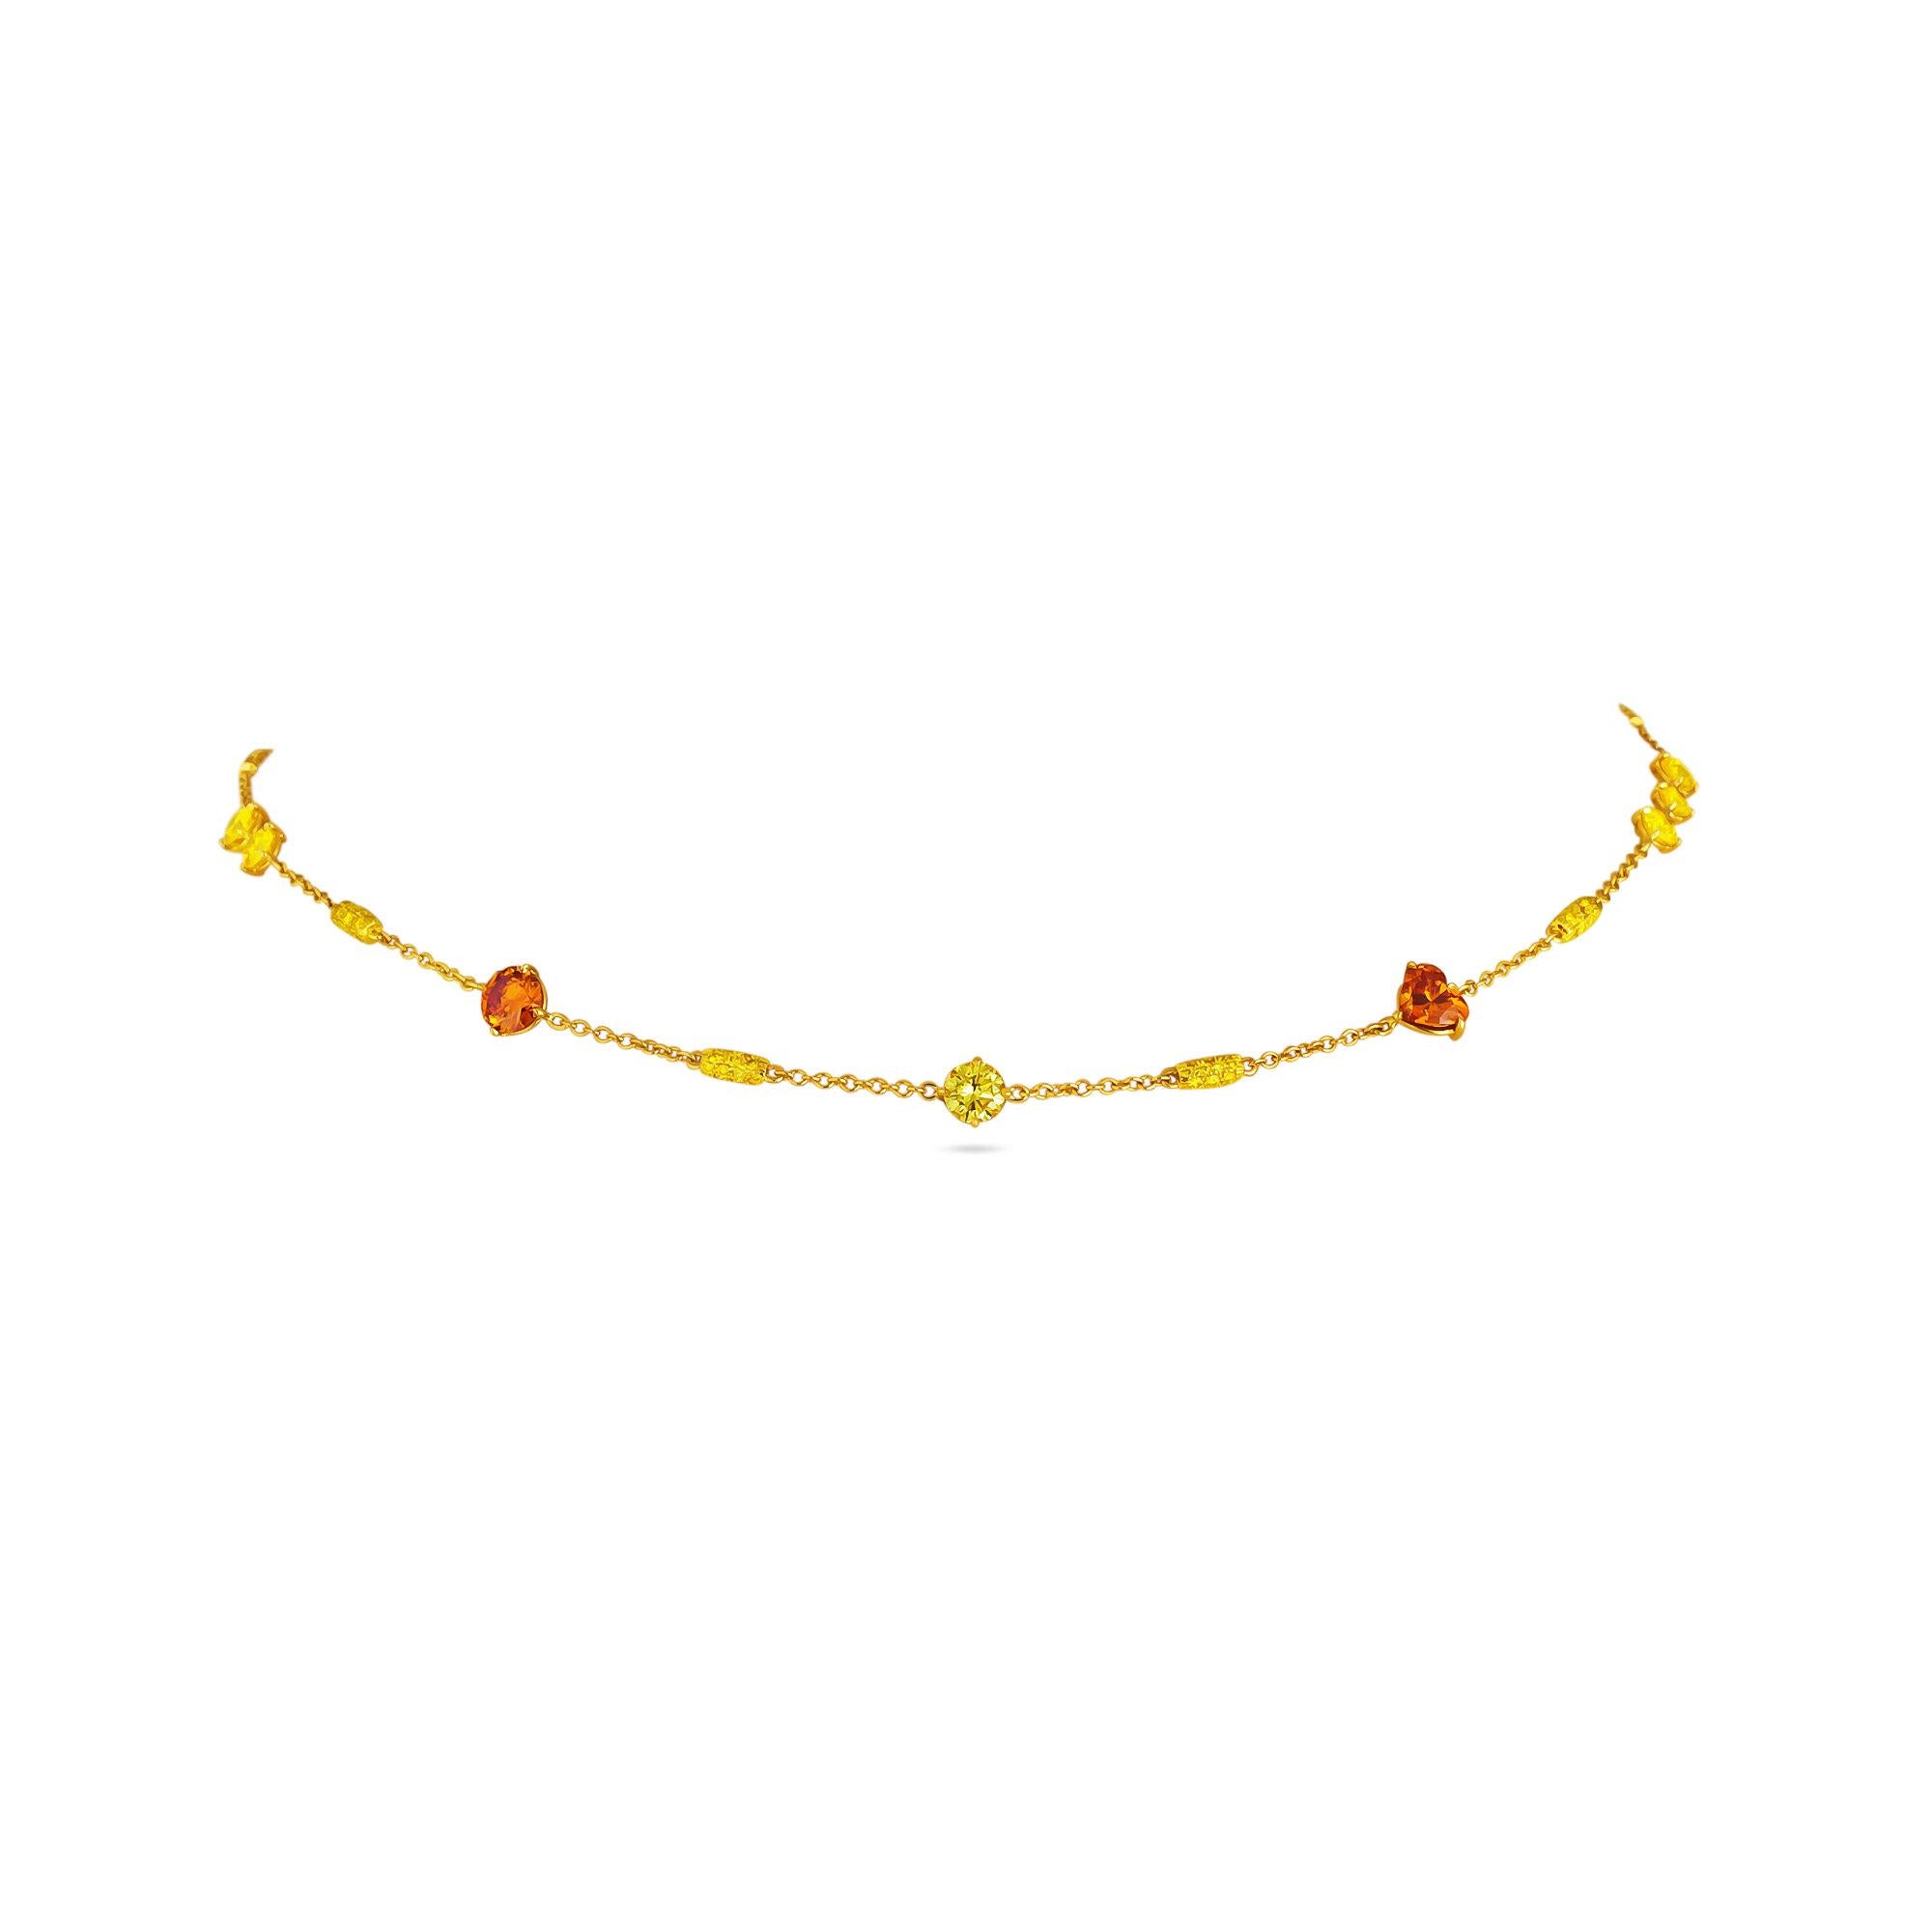 A collection of rare fancy shape natural orange and yellow diamonds dance gracefully together creating a one-of-a-kind necklace that is a musical masterpiece.  Designed and handmade by Steven Fox, this 18 karat gold necklace features one heart